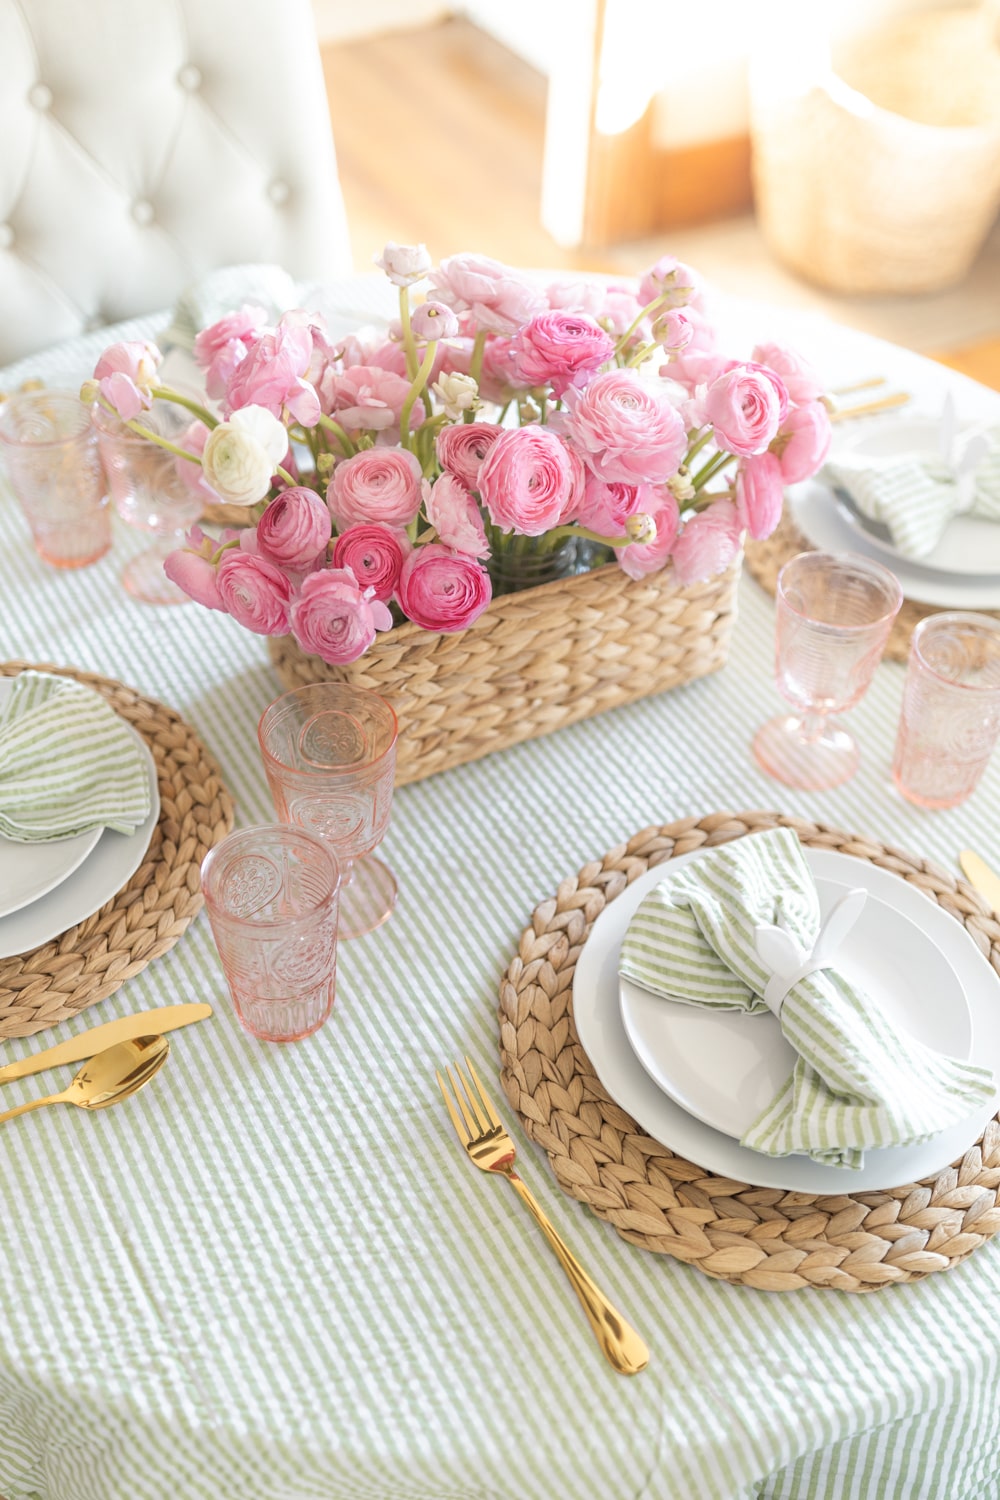 Simple Easter table settings designed by blogger Stephanie Ziajka on Diary of a Debutante